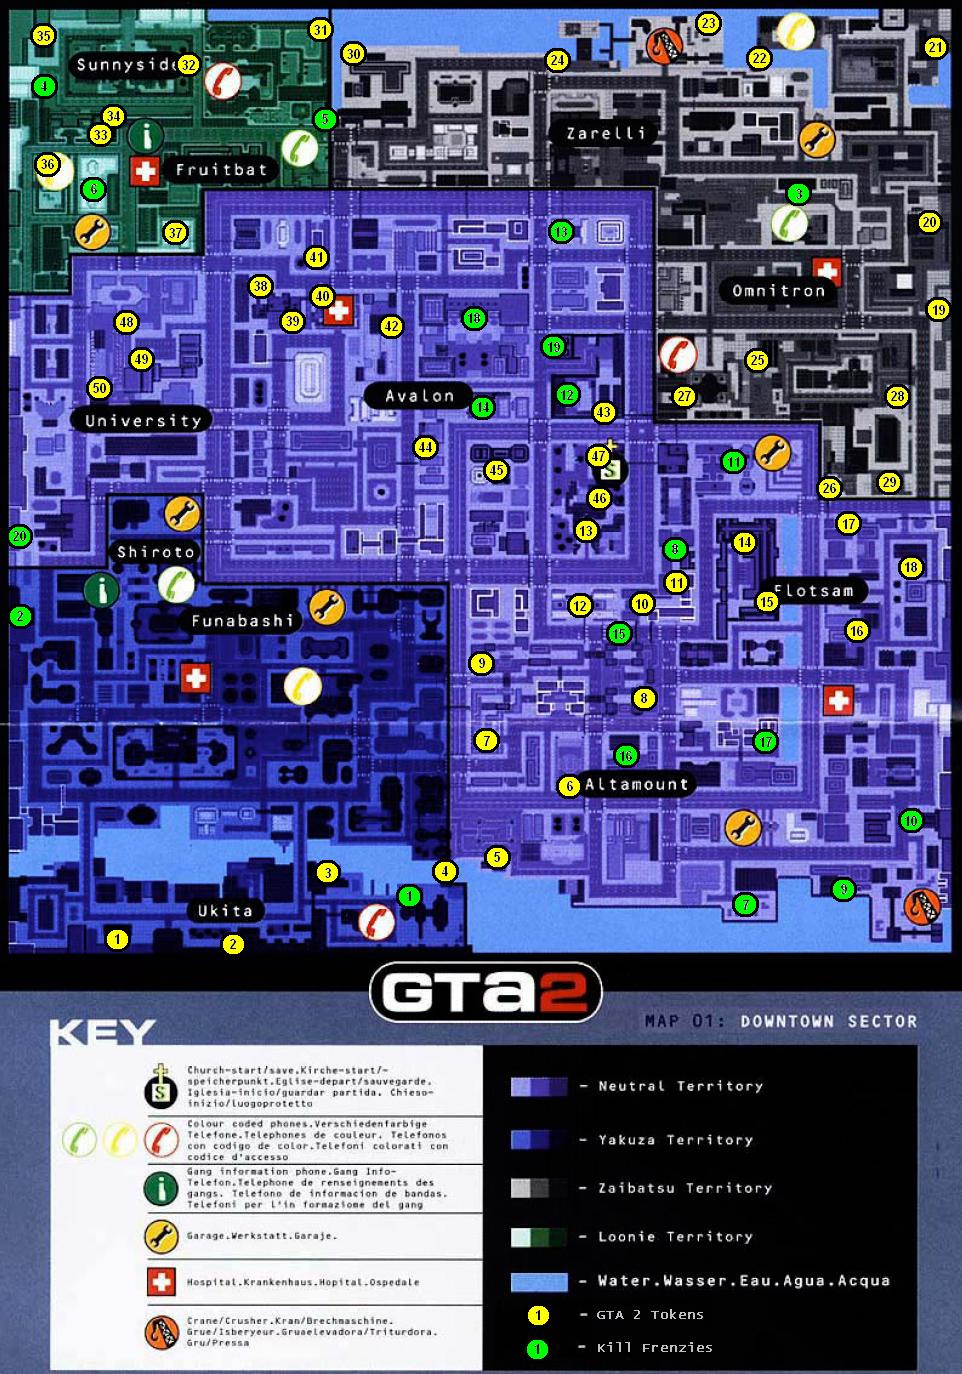 GTA 2 map of Downtown (1999)